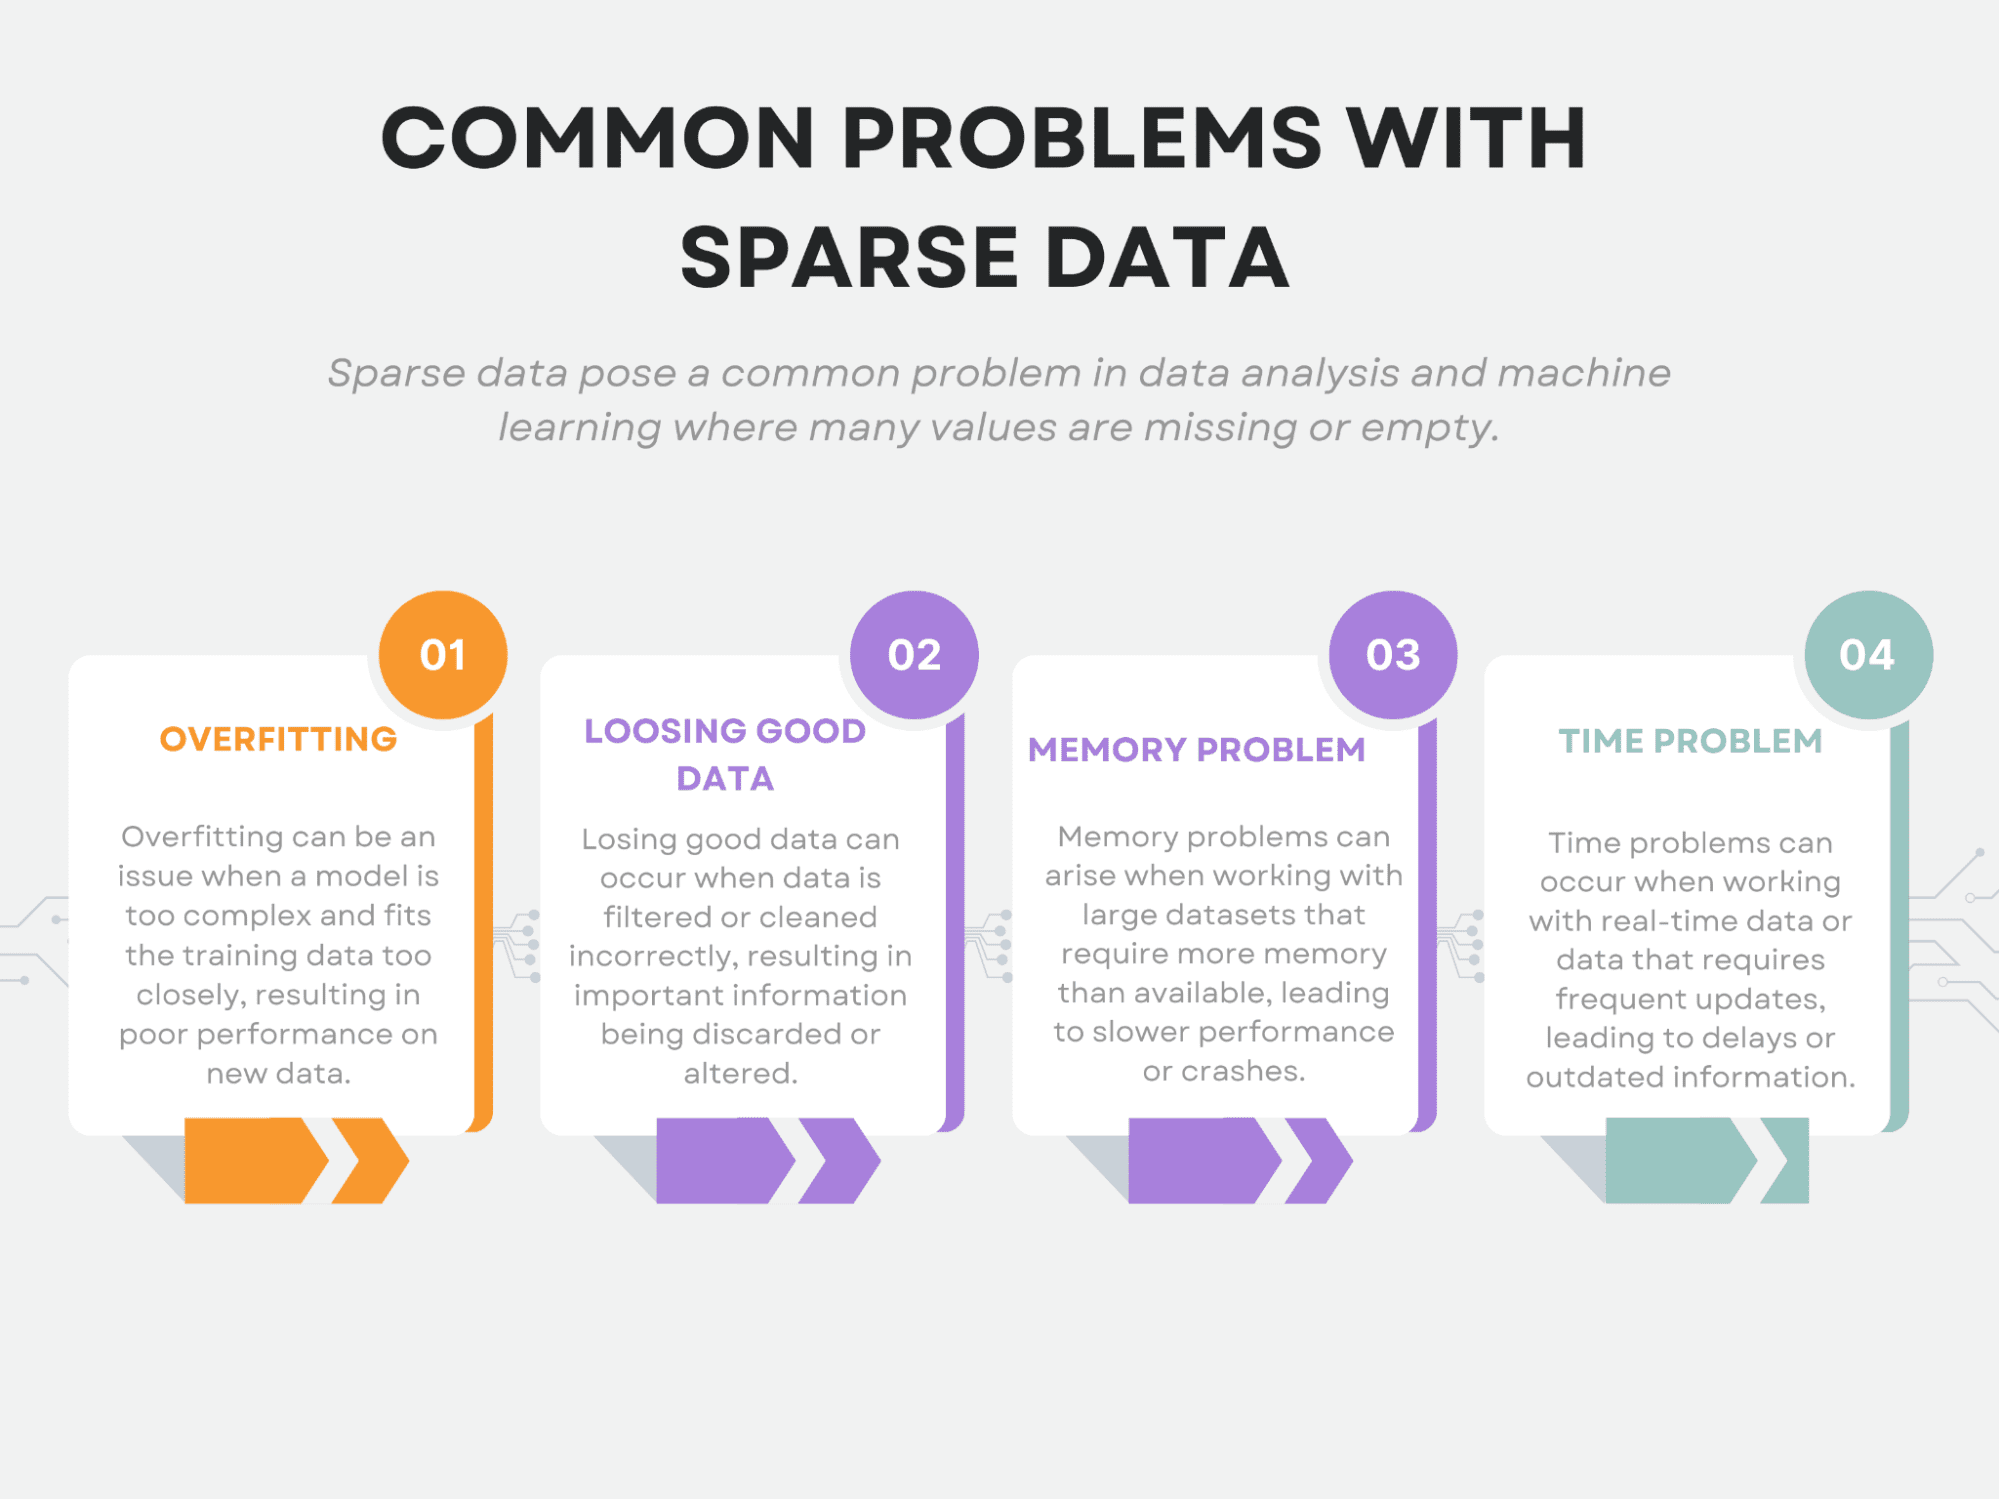 Best Machine Learning Model For Sparse Data